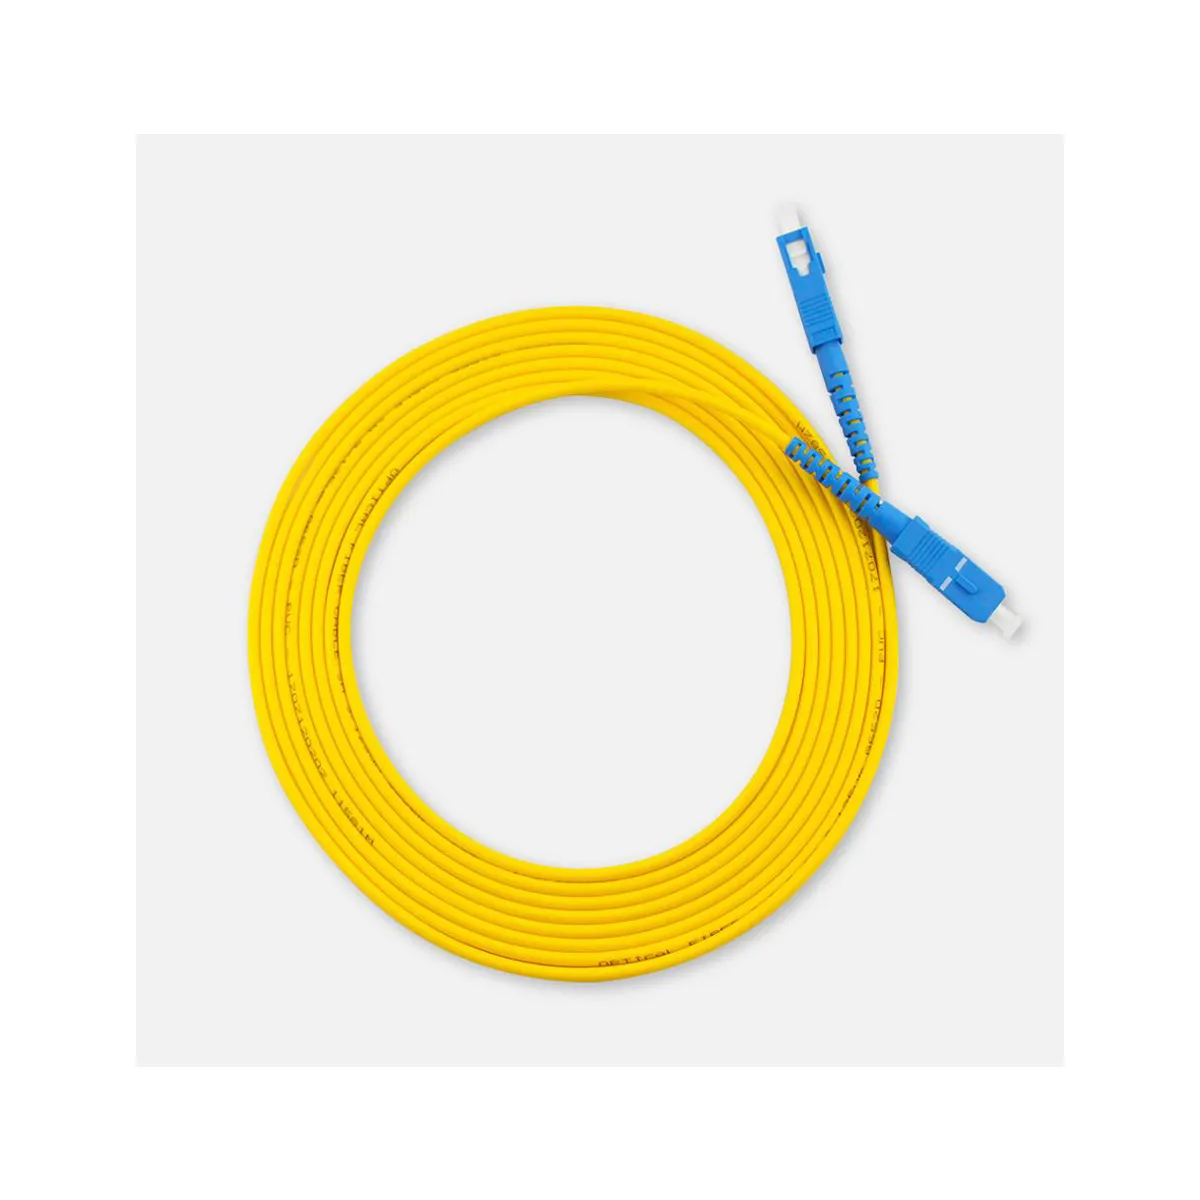 Hot sale 3m 5m 10m Fiber optic patch cord with Low IL and High RL Fiber patch cord